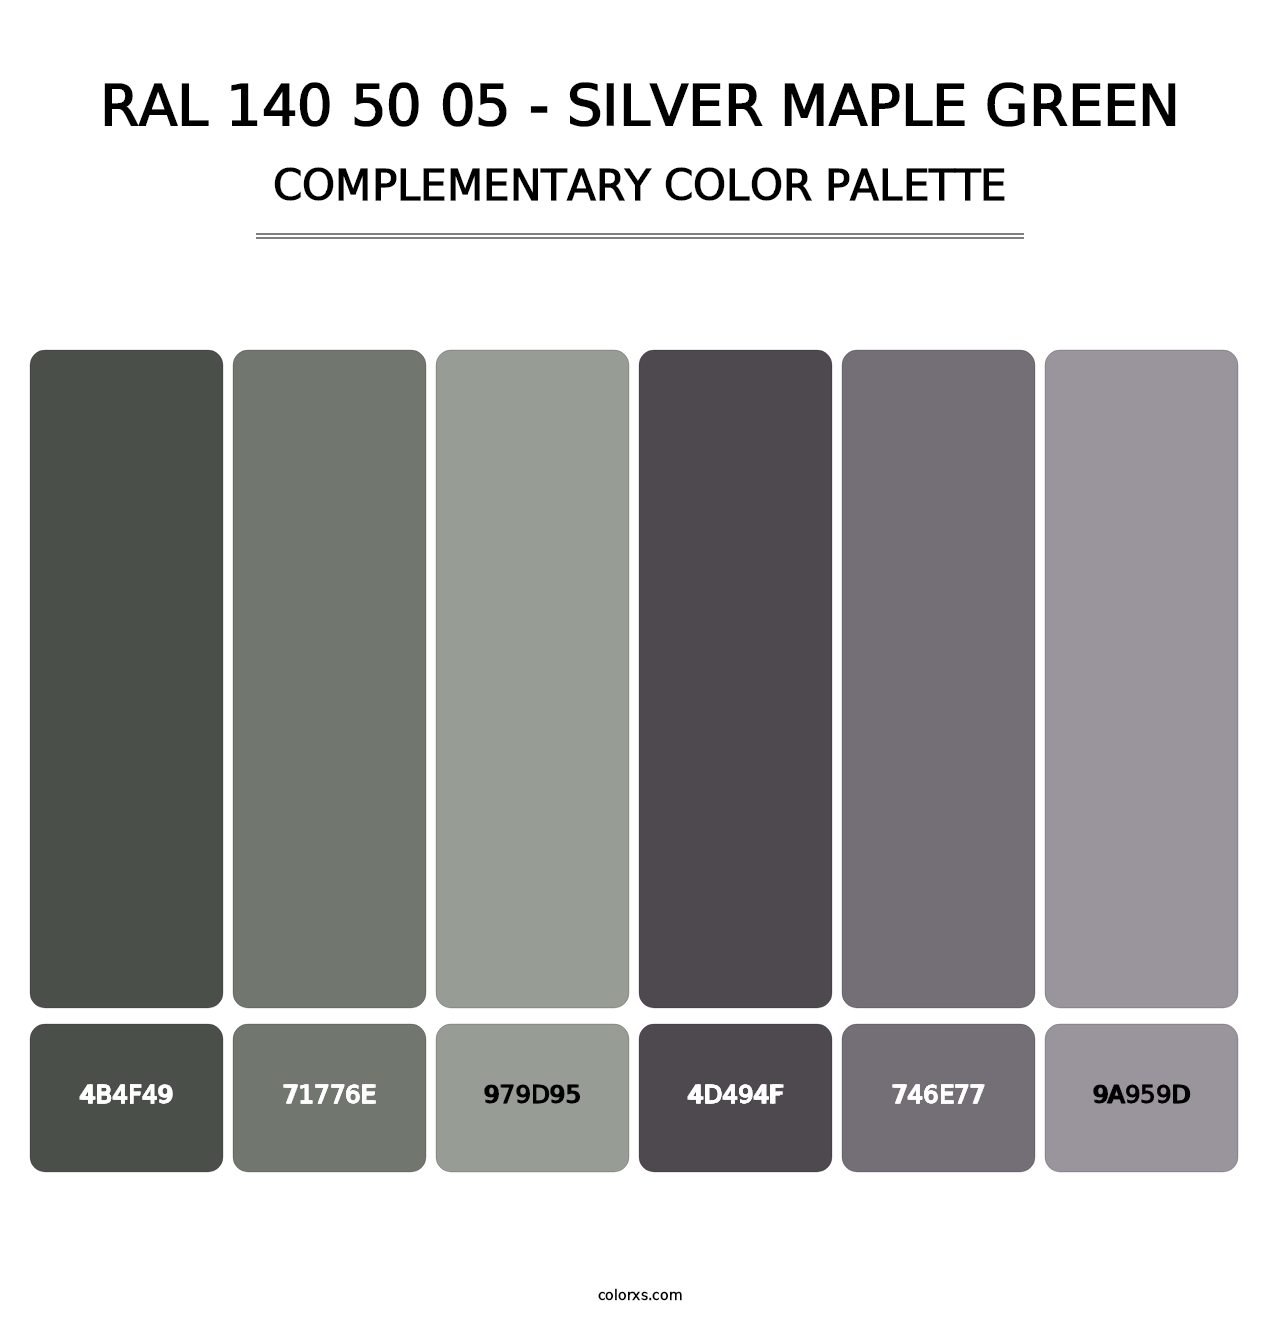 RAL 140 50 05 - Silver Maple Green - Complementary Color Palette